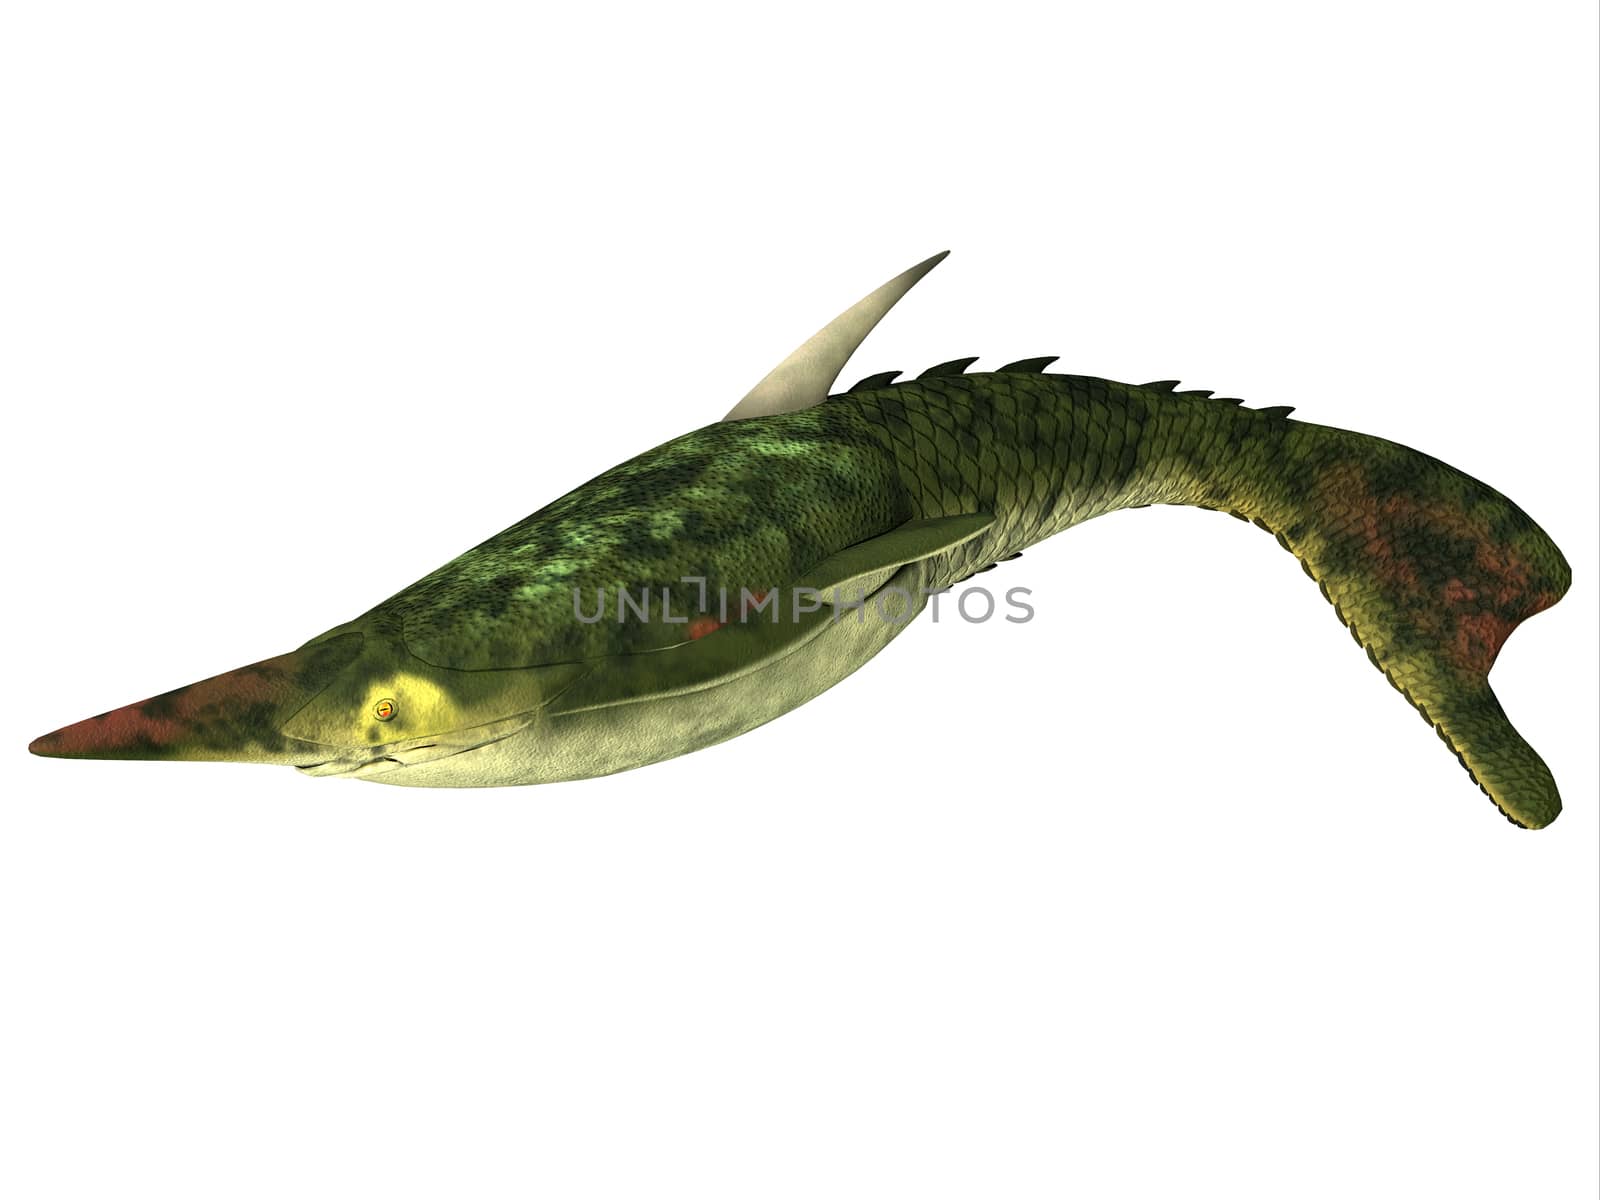 Pteraspis is an extinct genus of jawless fish that lived in the Devonian Period.